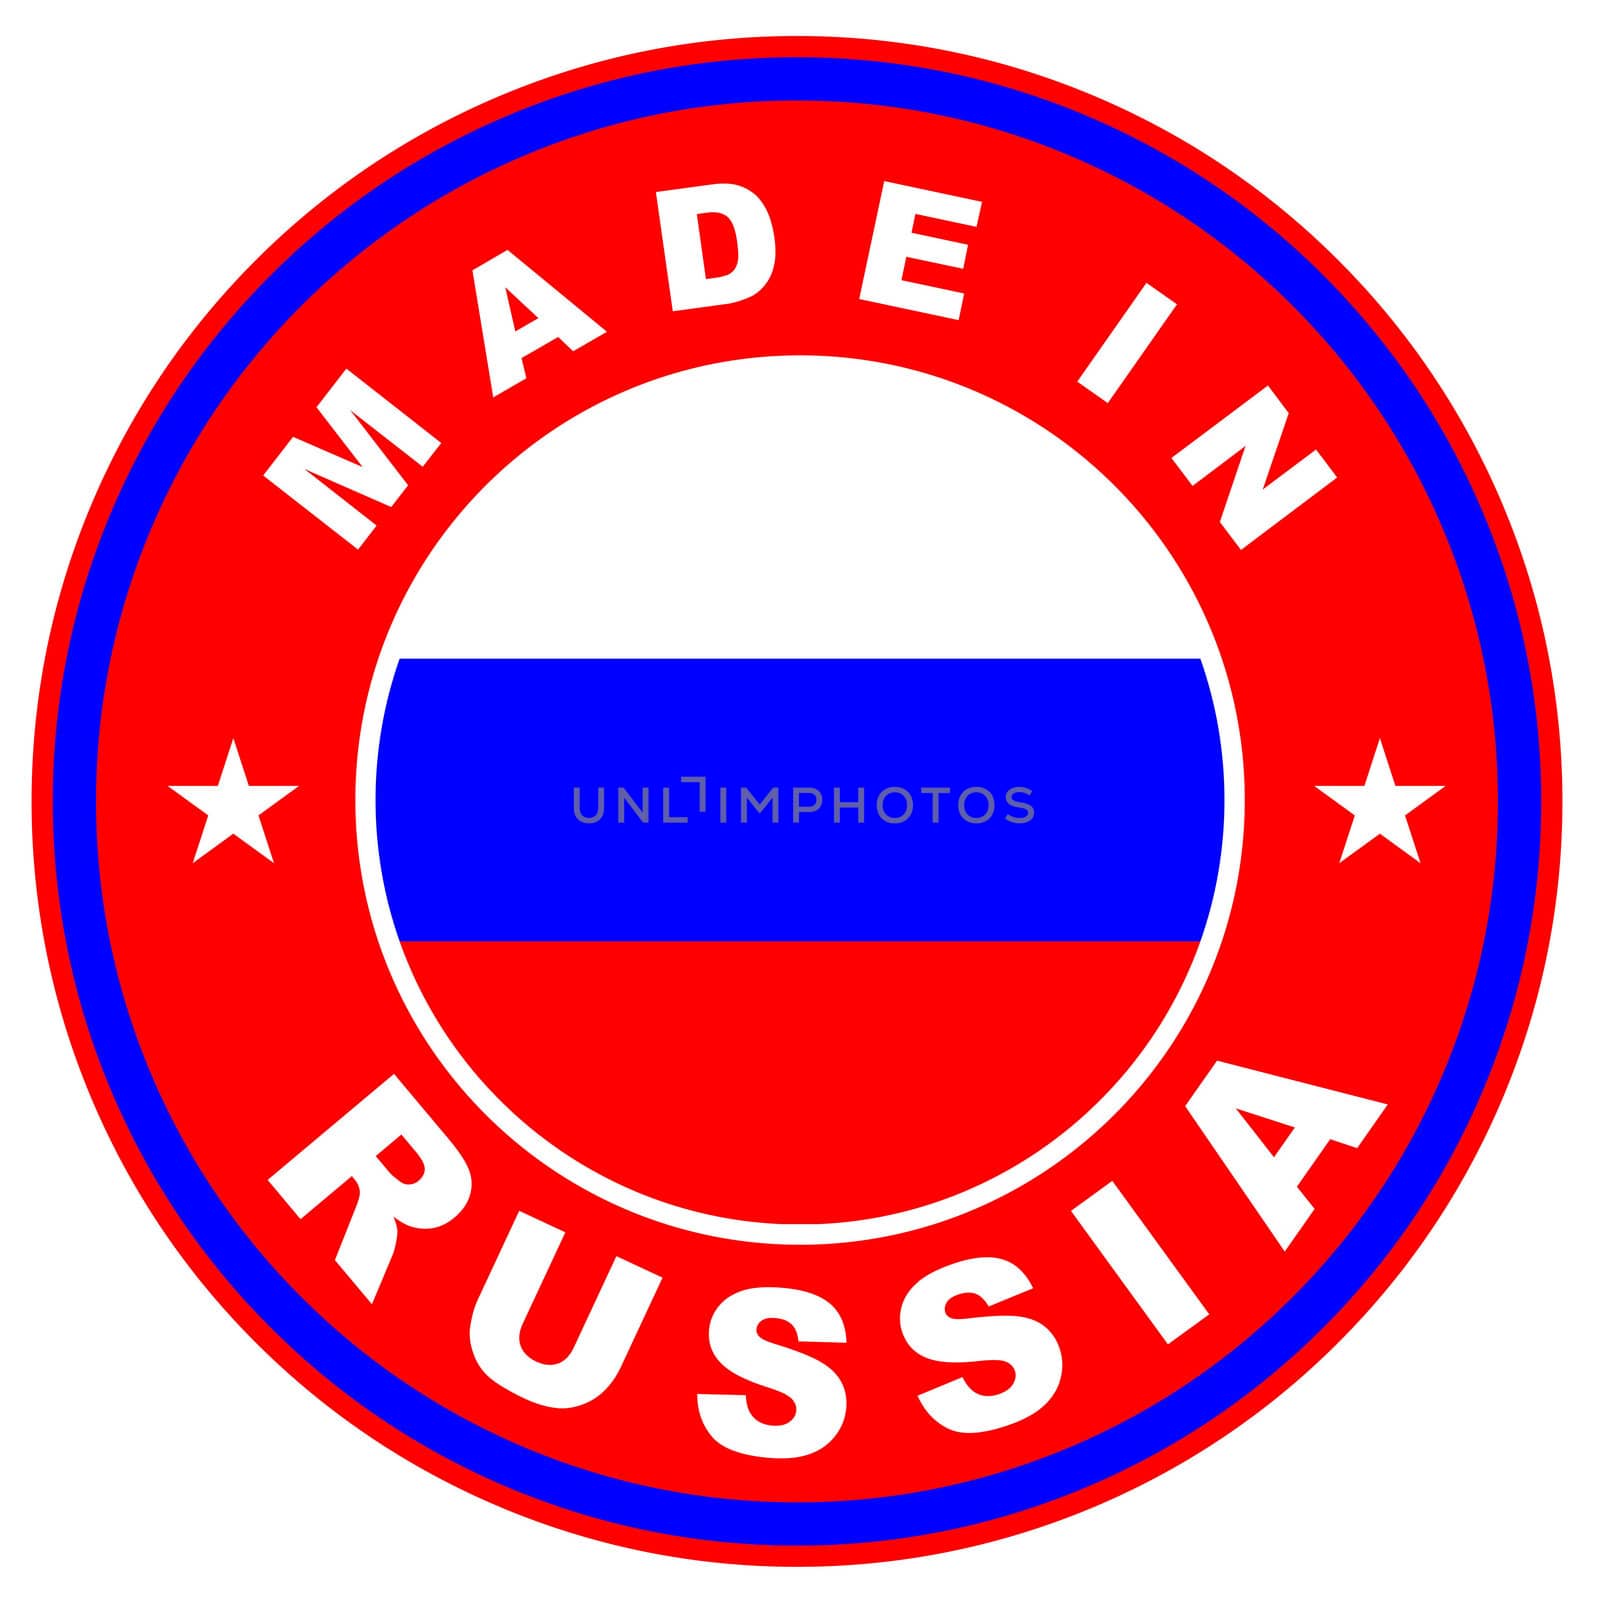 made in russia by tony4urban